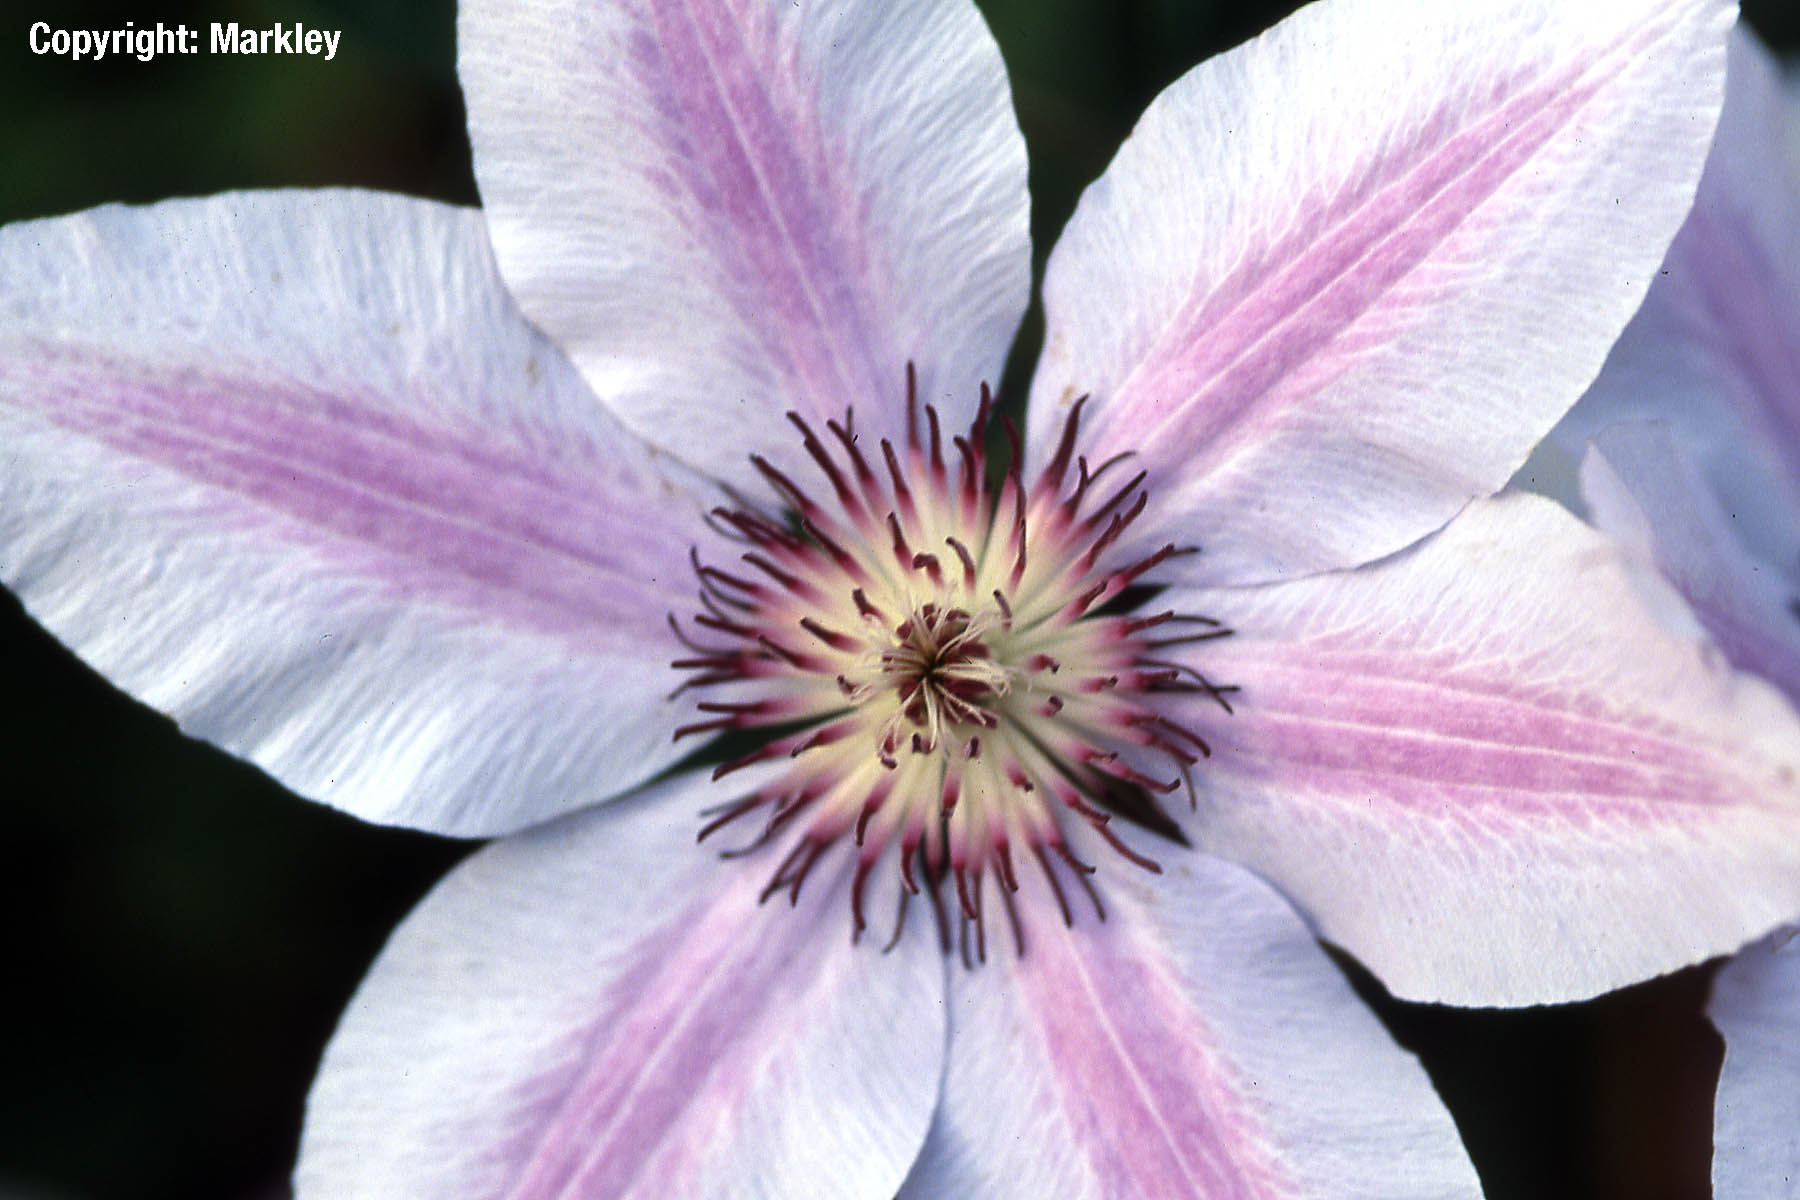 Großblumige Clematis 'Nelly Moser'